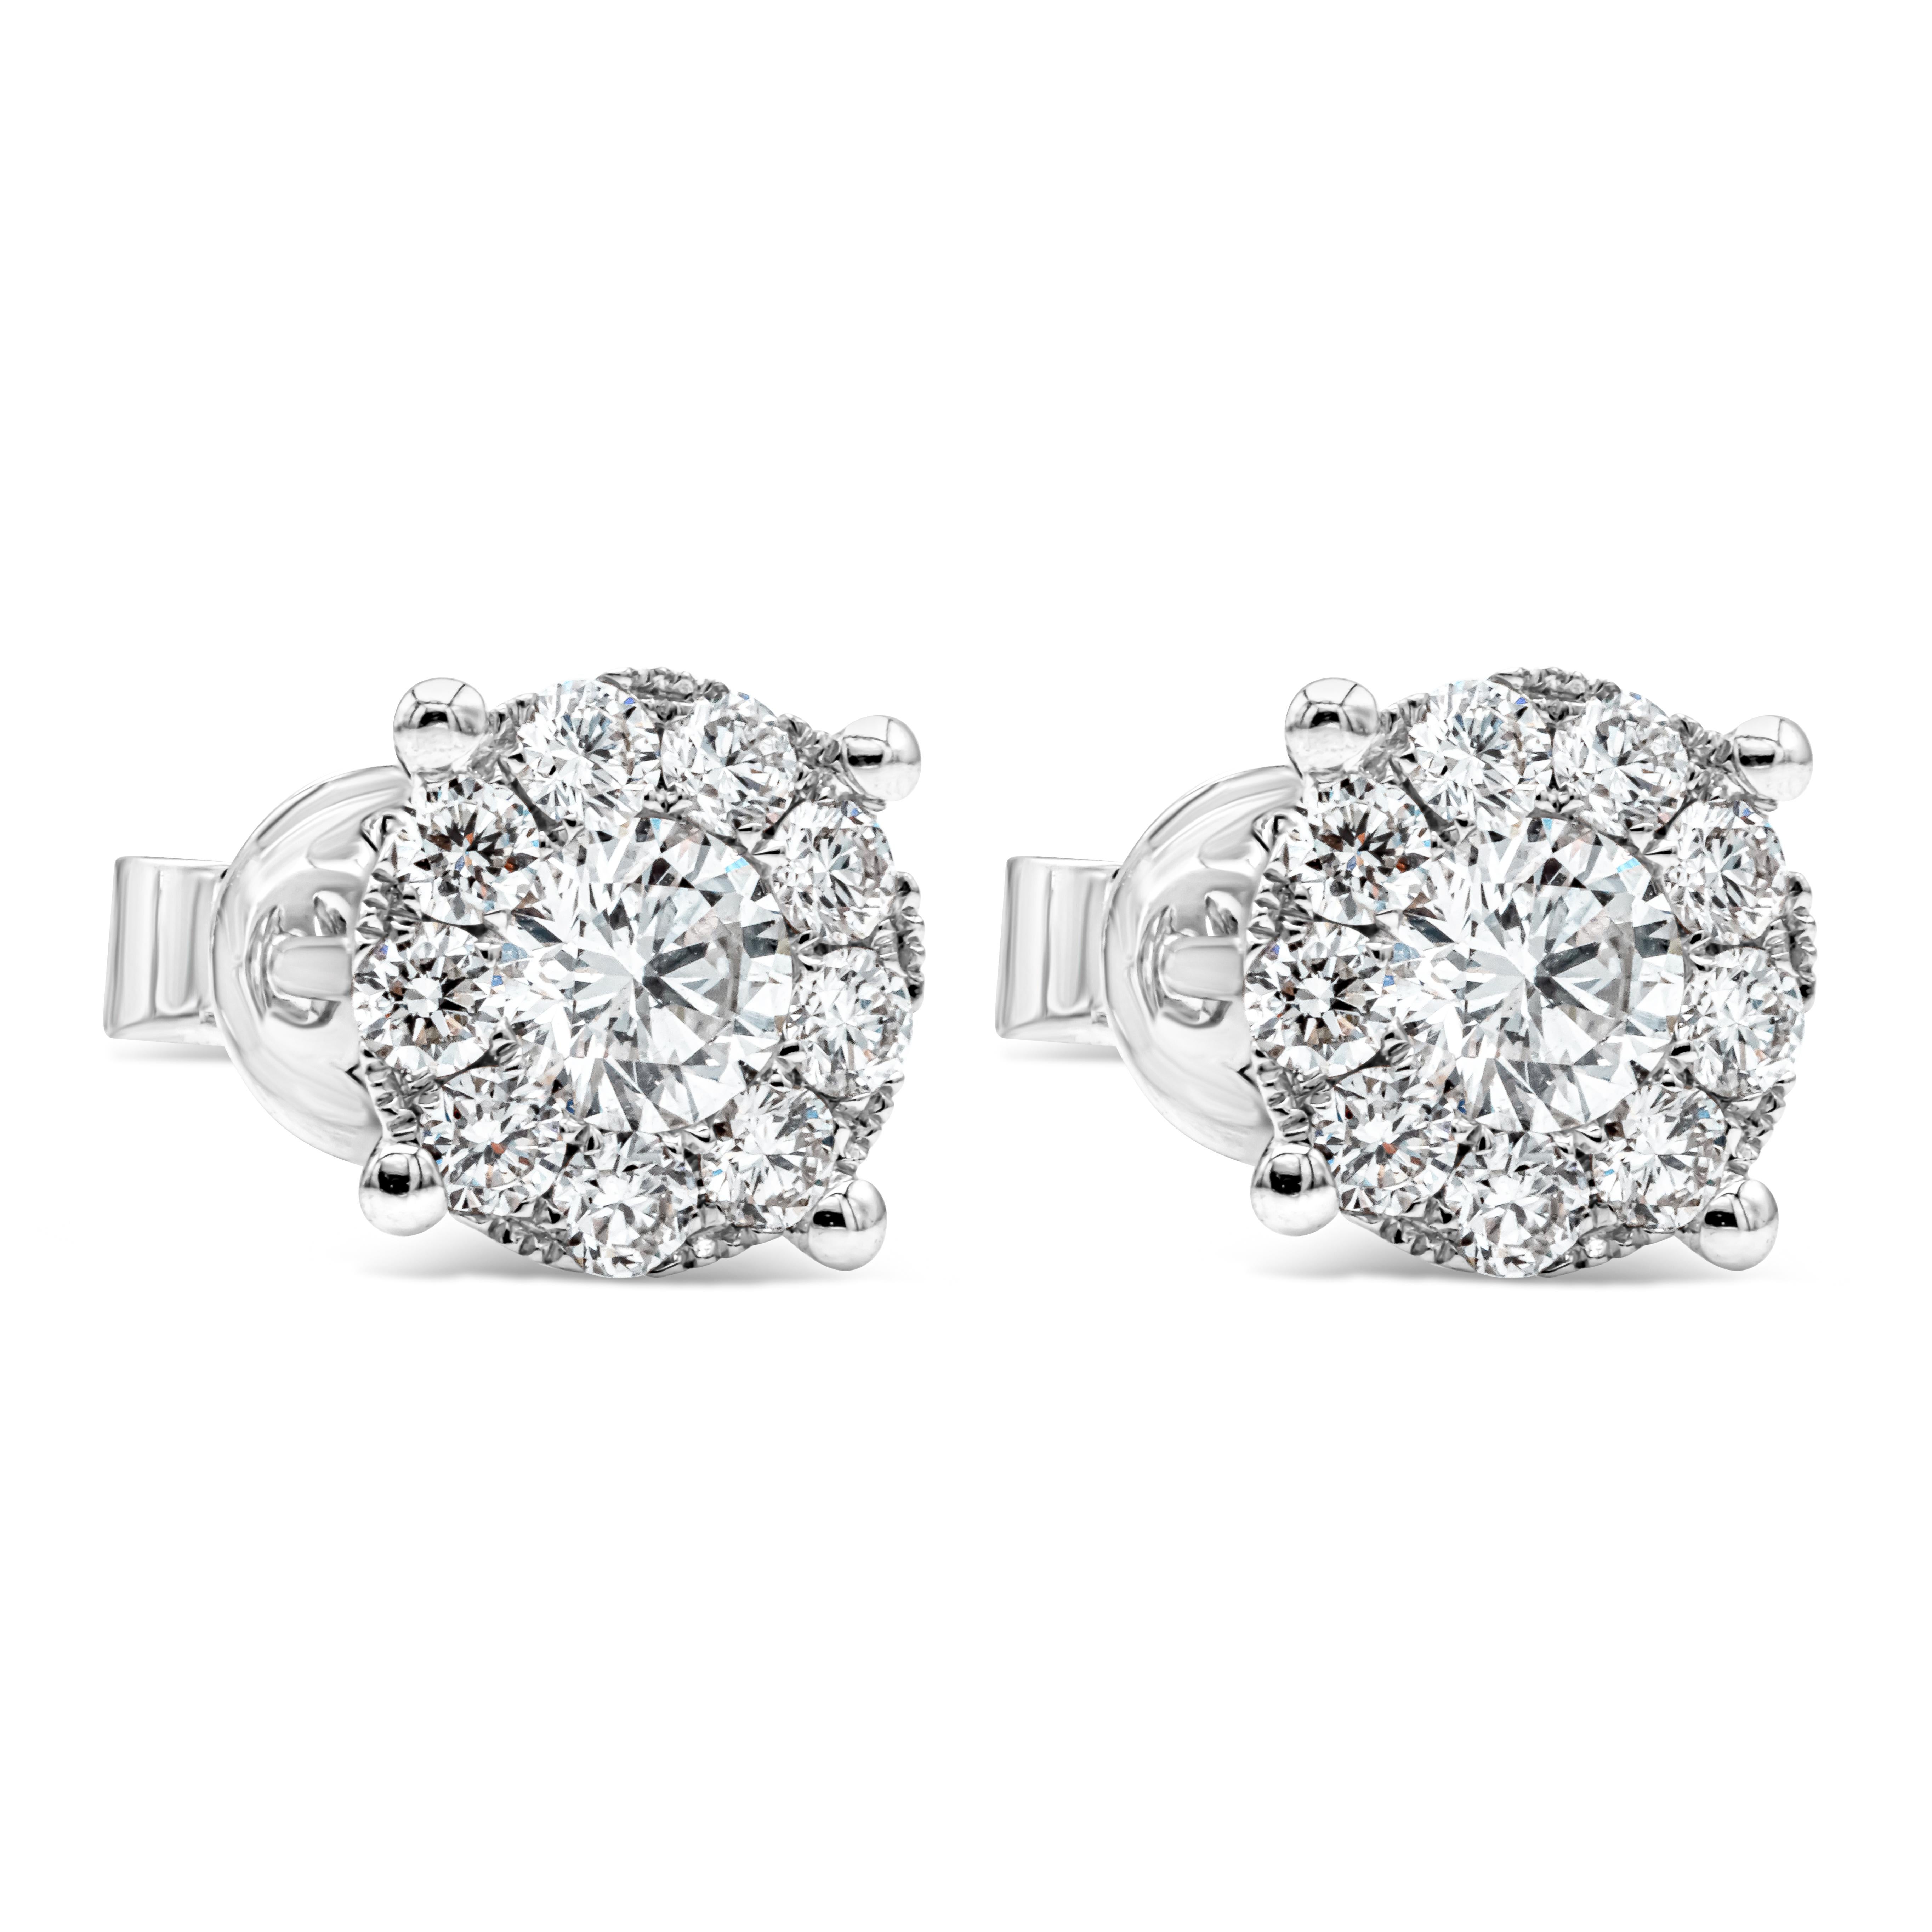 Contemporary Roman Malakov 1.13 Carats Total Brilliant Round Diamond Cluster Stud Earrings For Sale